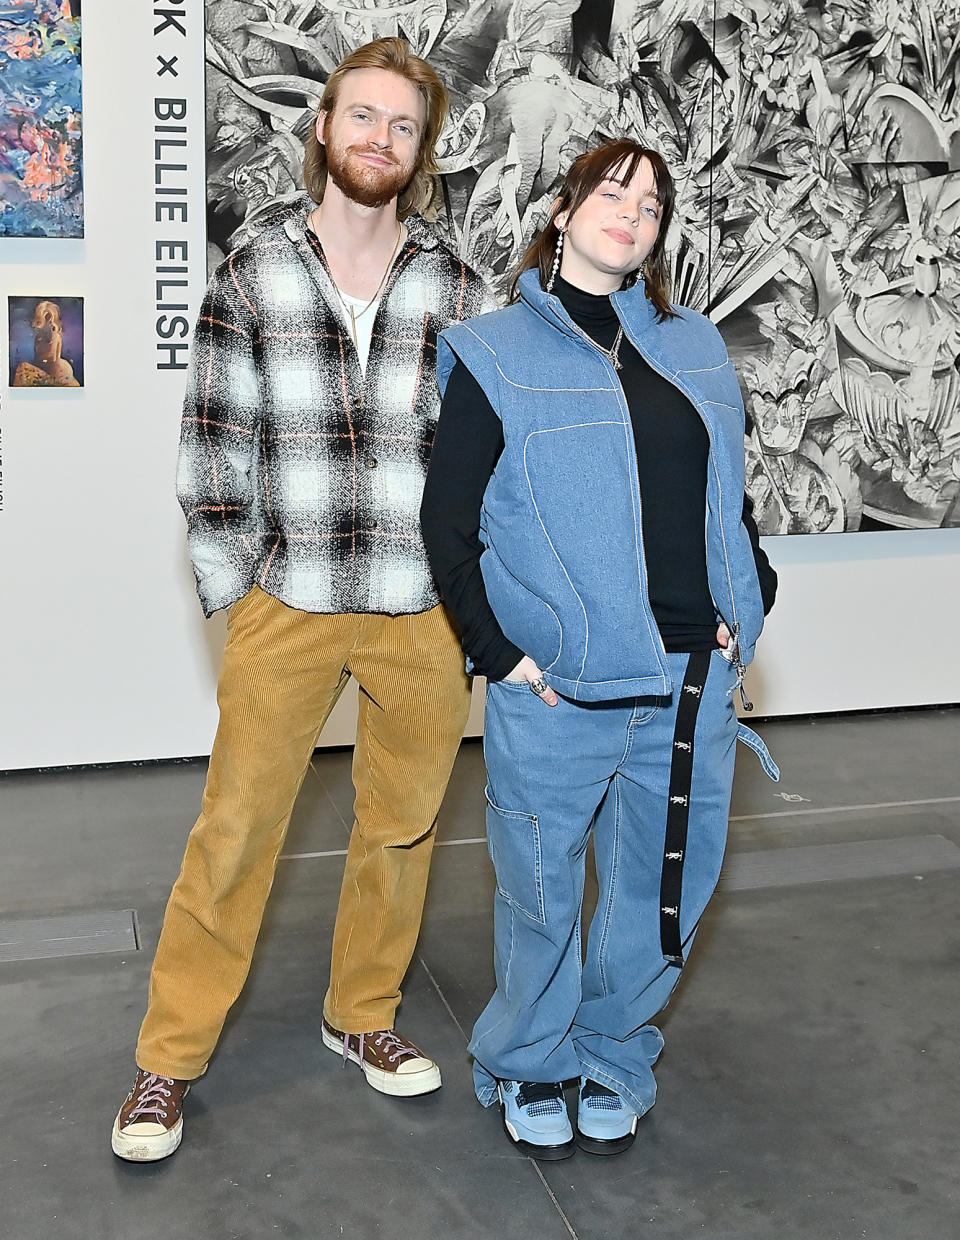 <p>Finneas and Billie Eilish arrive at the <em>Artists Inspired by Music: Interscope Reimagined</em> exhibit opening on Jan. 26 at LACMA in Los Angeles. </p>